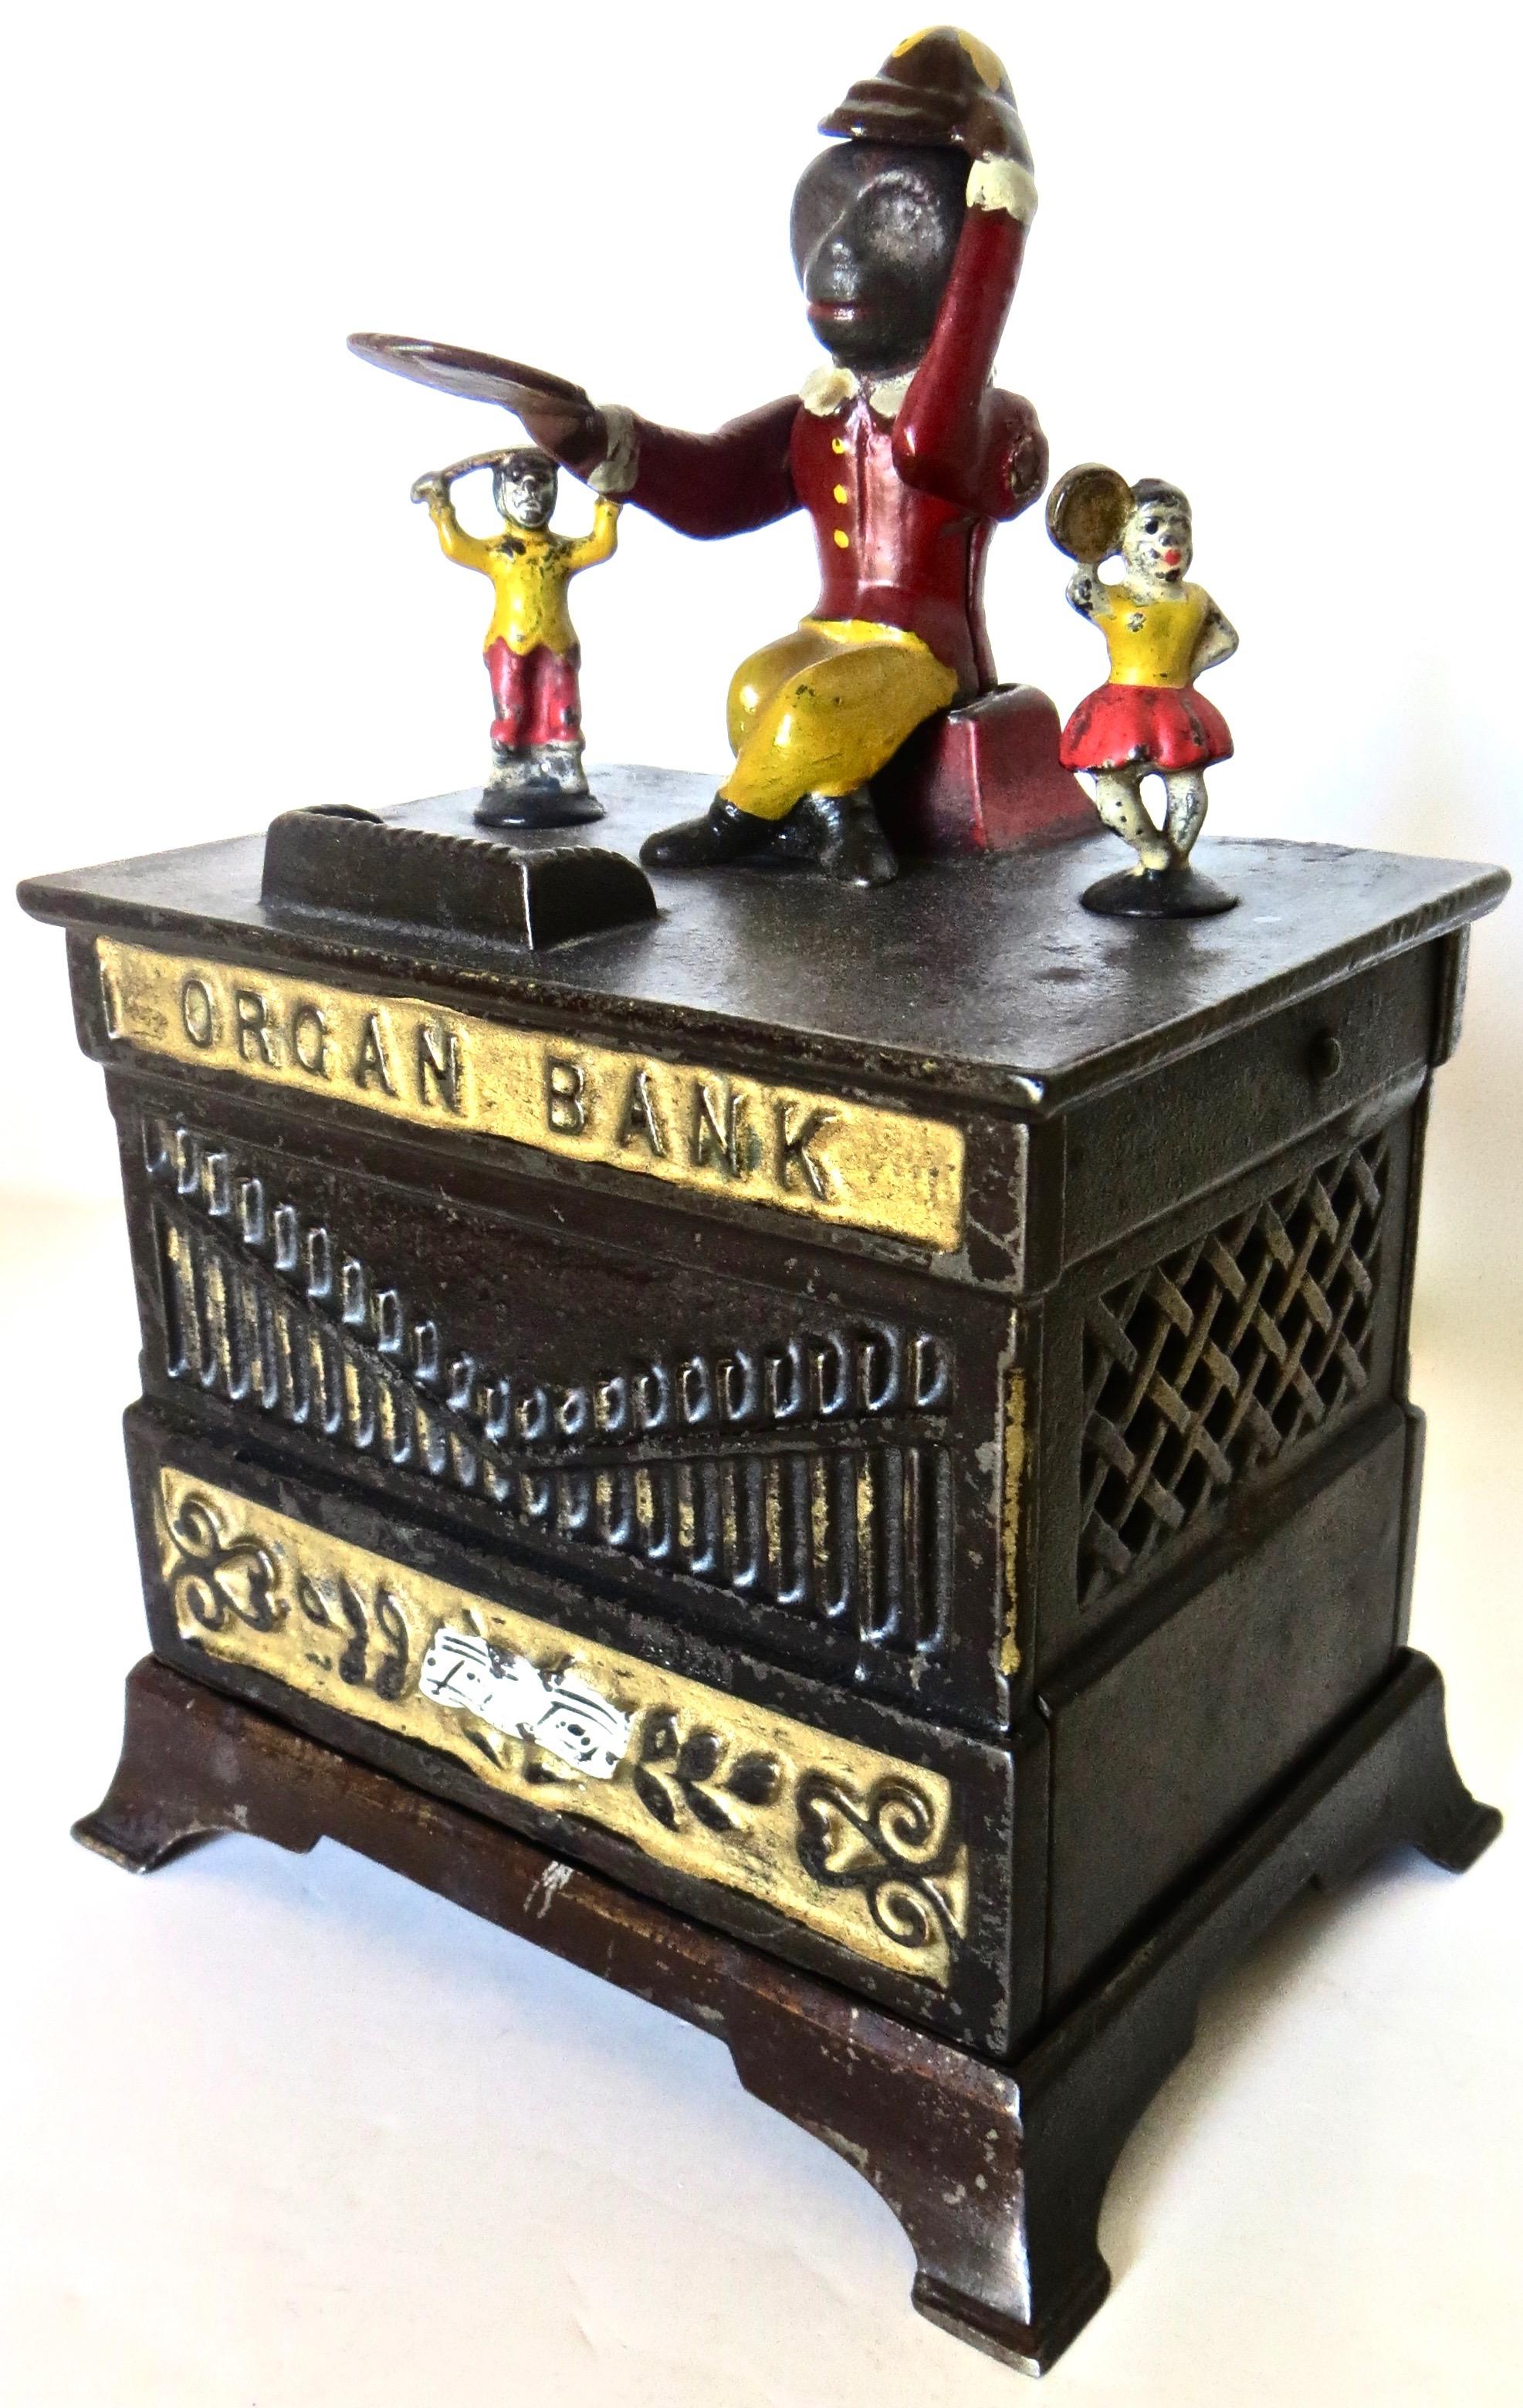 This American cast iron bank known as 